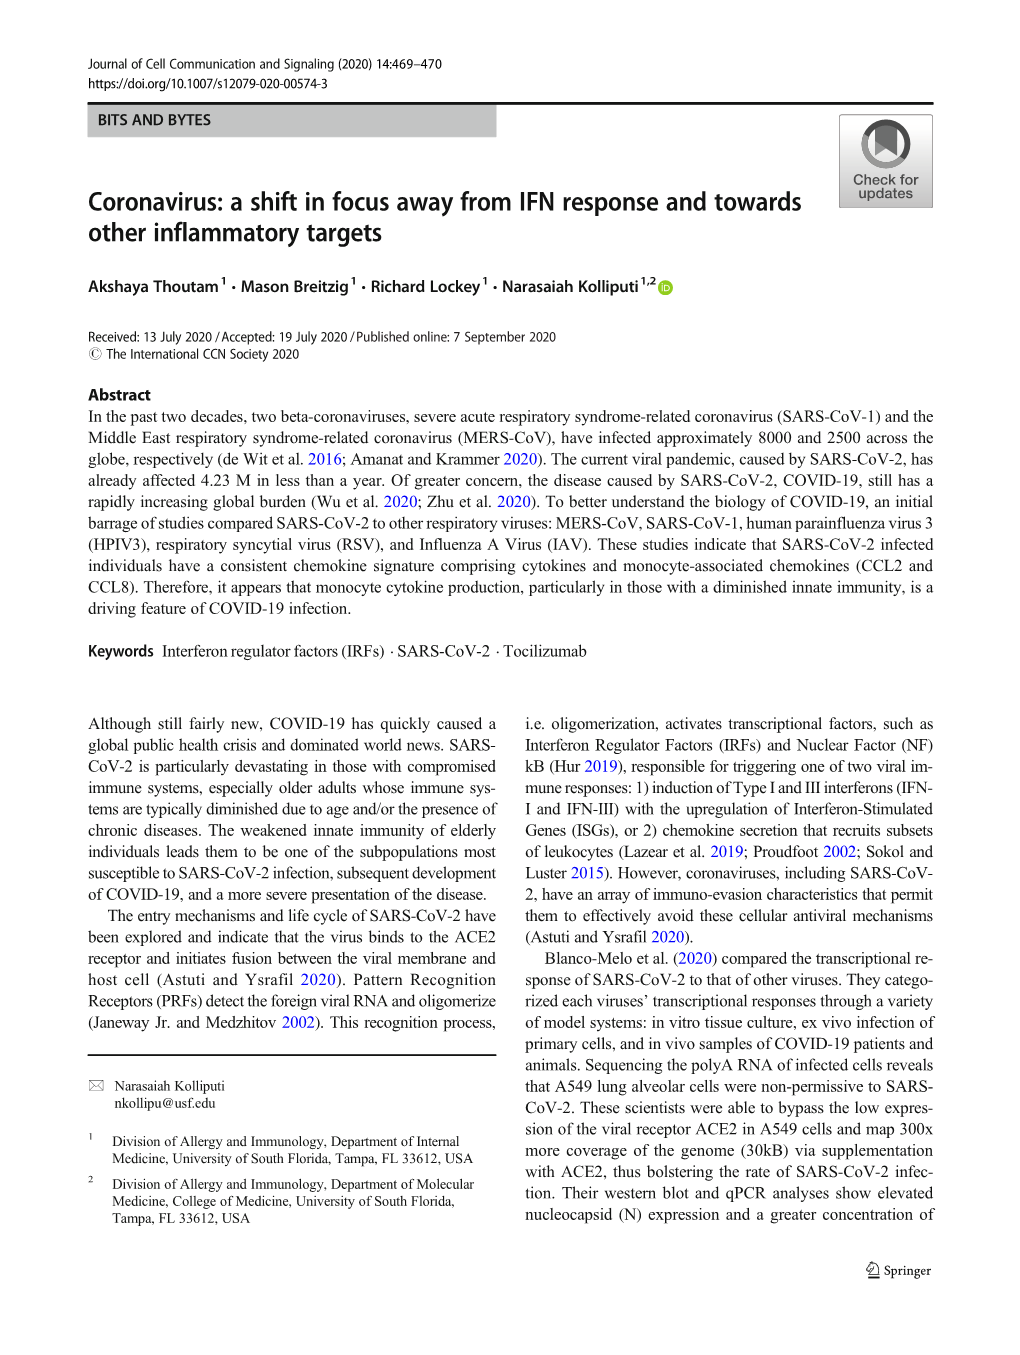 Coronavirus: a Shift in Focus Away from IFN Response and Towards Other Inflammatory Targets